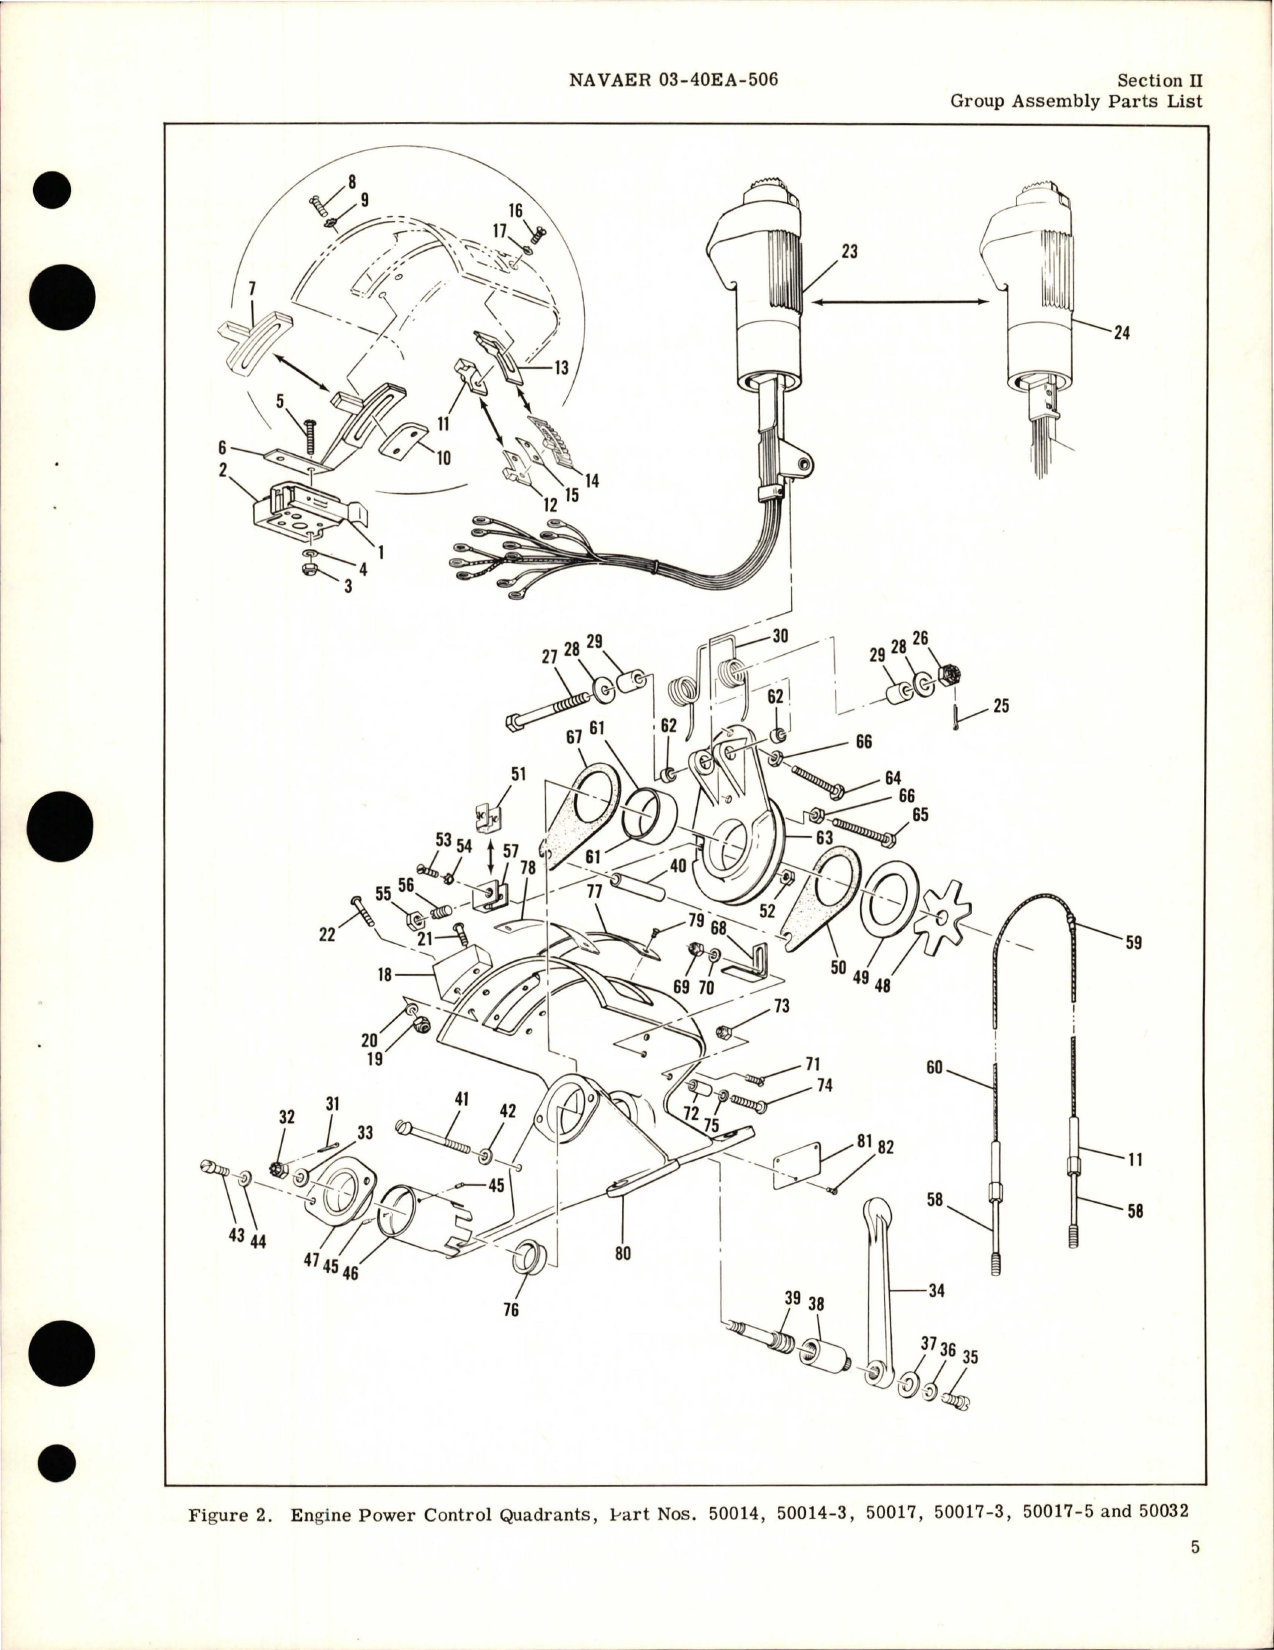 Sample page 7 from AirCorps Library document: Illustrated Parts Breakdown for Engine Power Control Quadrants